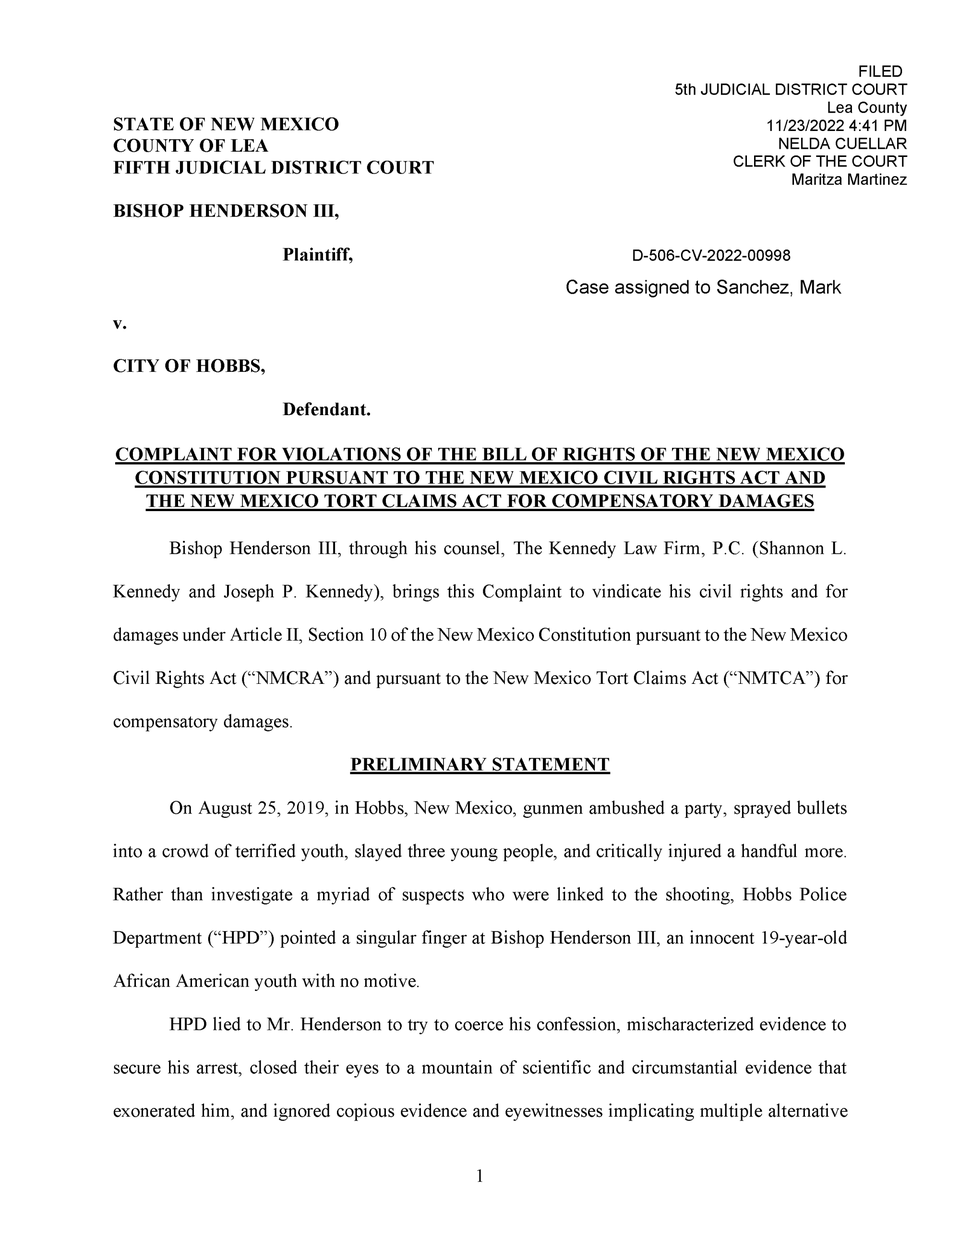 Page 1 of Henderson Complaint with attachments_FINAL, 11.23.22.pdf